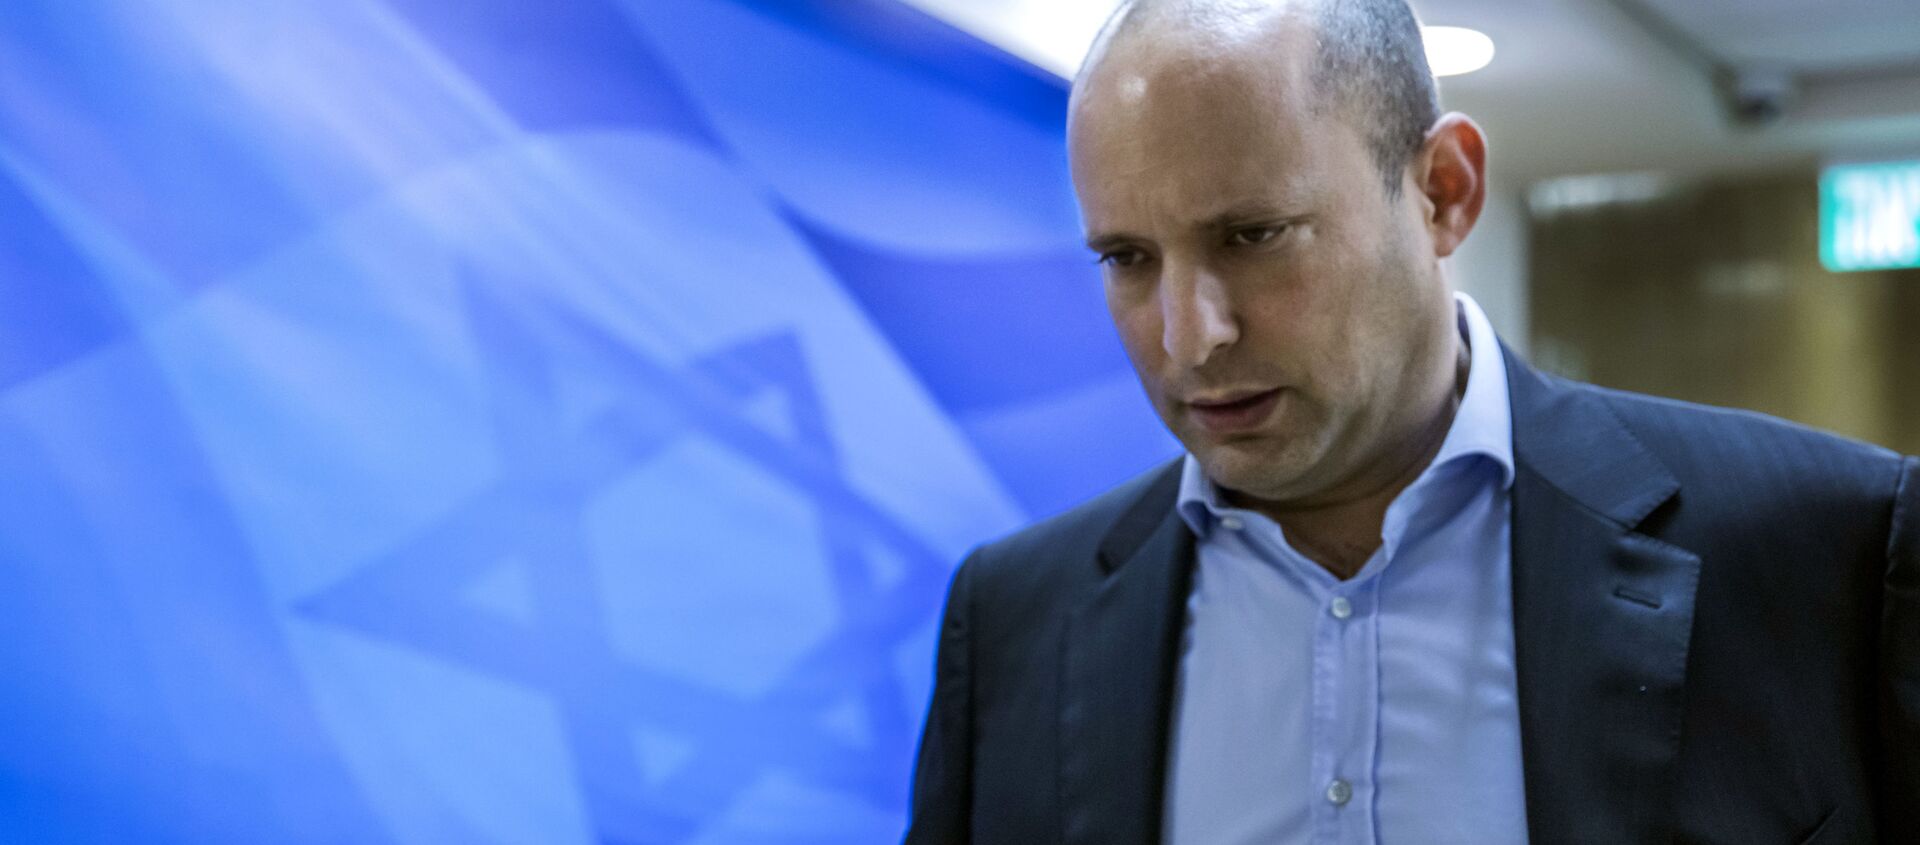 Israeli Minister of Education Naftali Bennett, who is also the  leader of the religious  Jewish Home party, arrives for the weekly cabinet meeting in Jerusalem, Sunday, Feb. 4, 2018 - Sputnik International, 1920, 16.10.2020